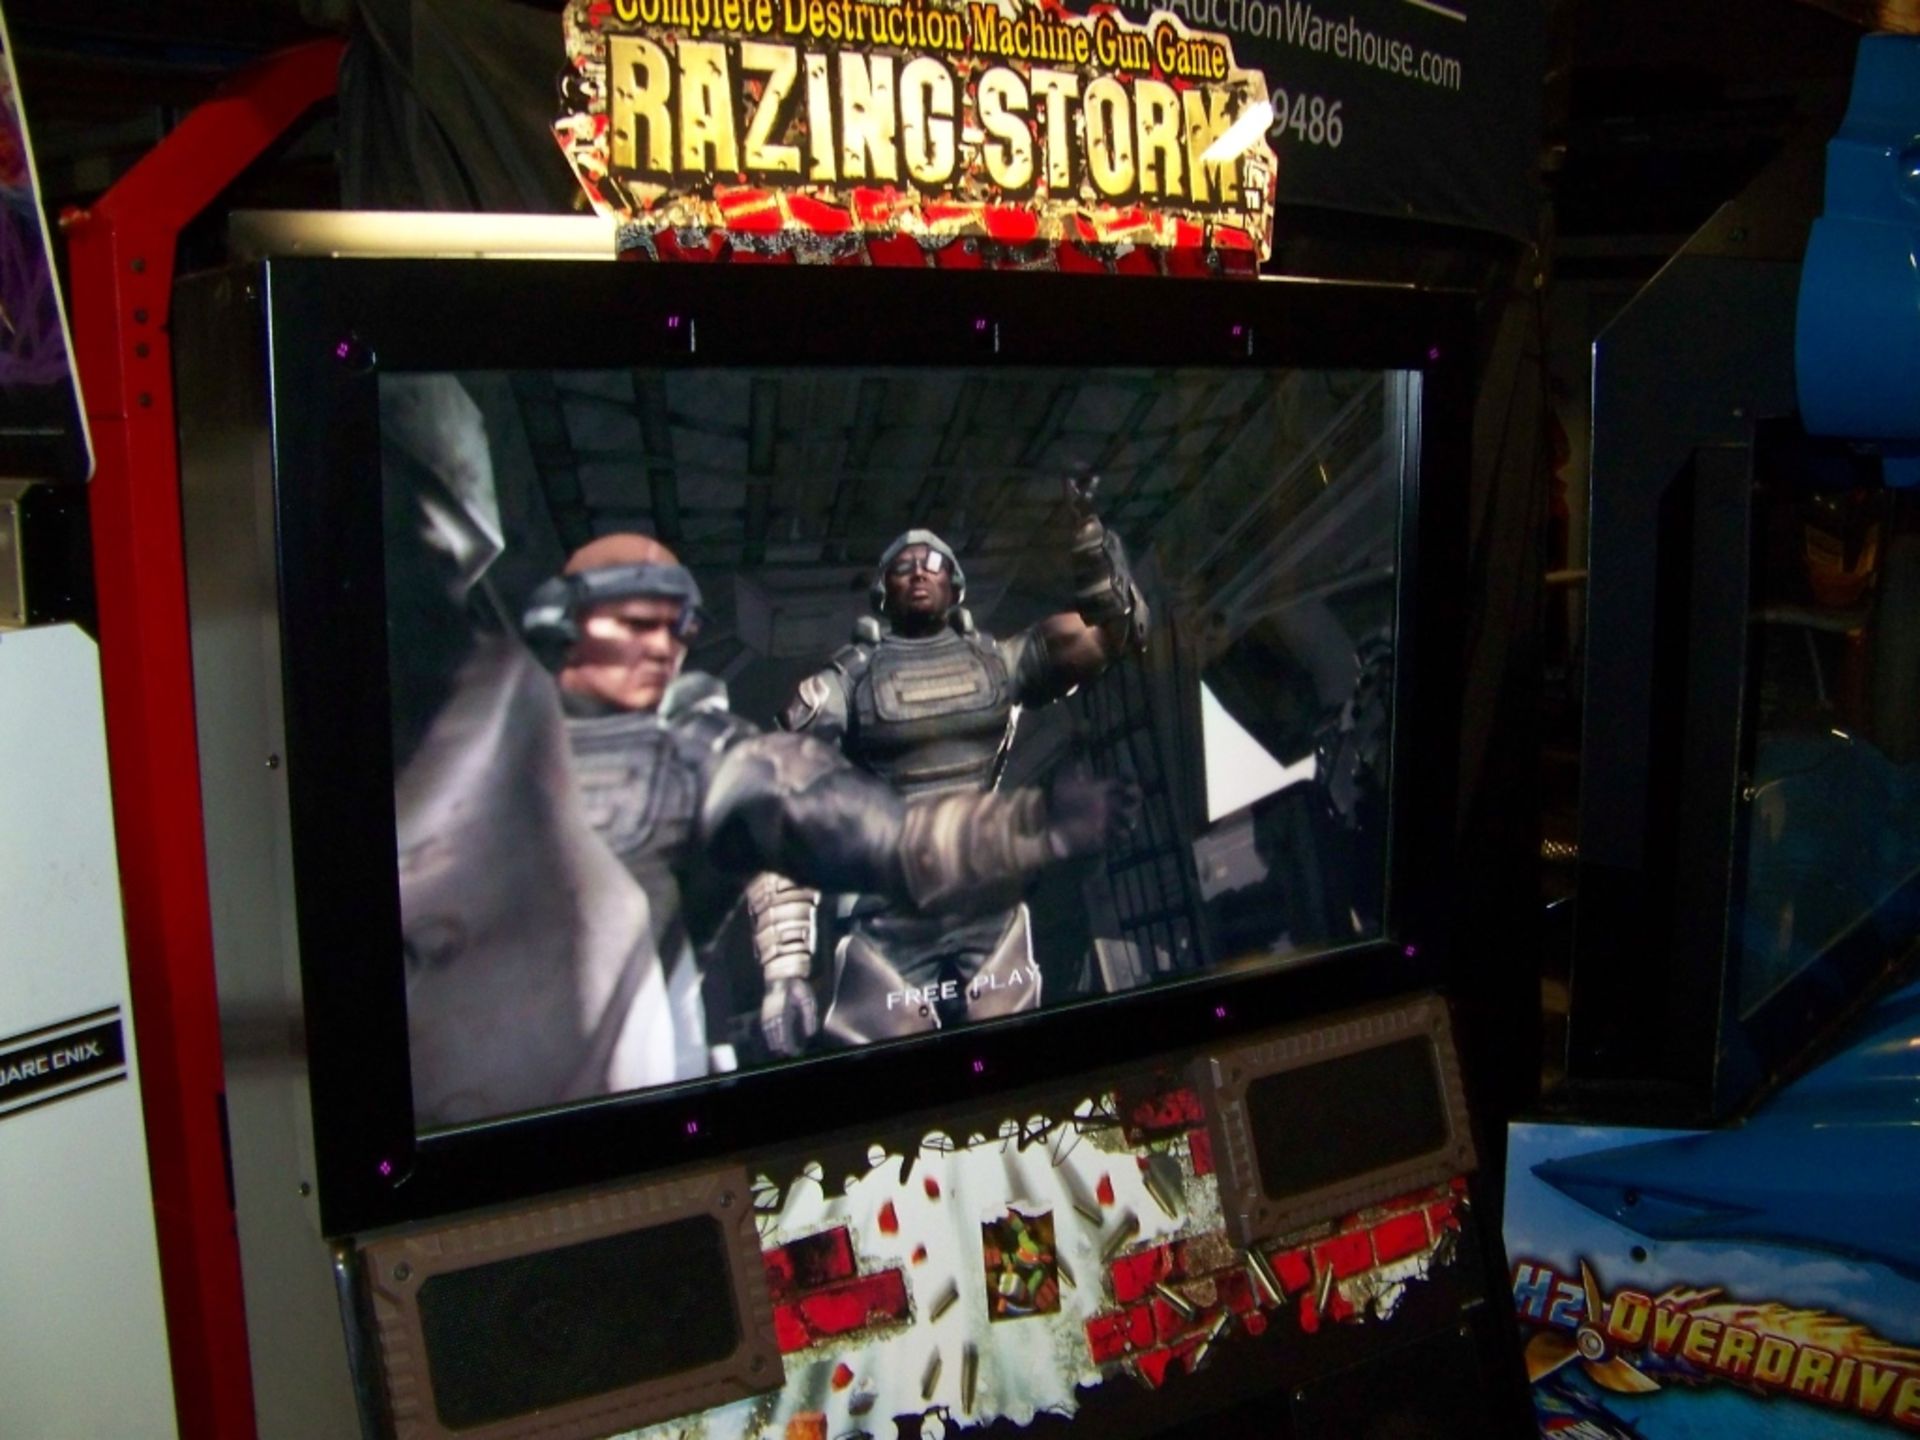 RAZING STORM 42"" LCD SHOOTER ARCADE GAME NAMCO - Image 8 of 12